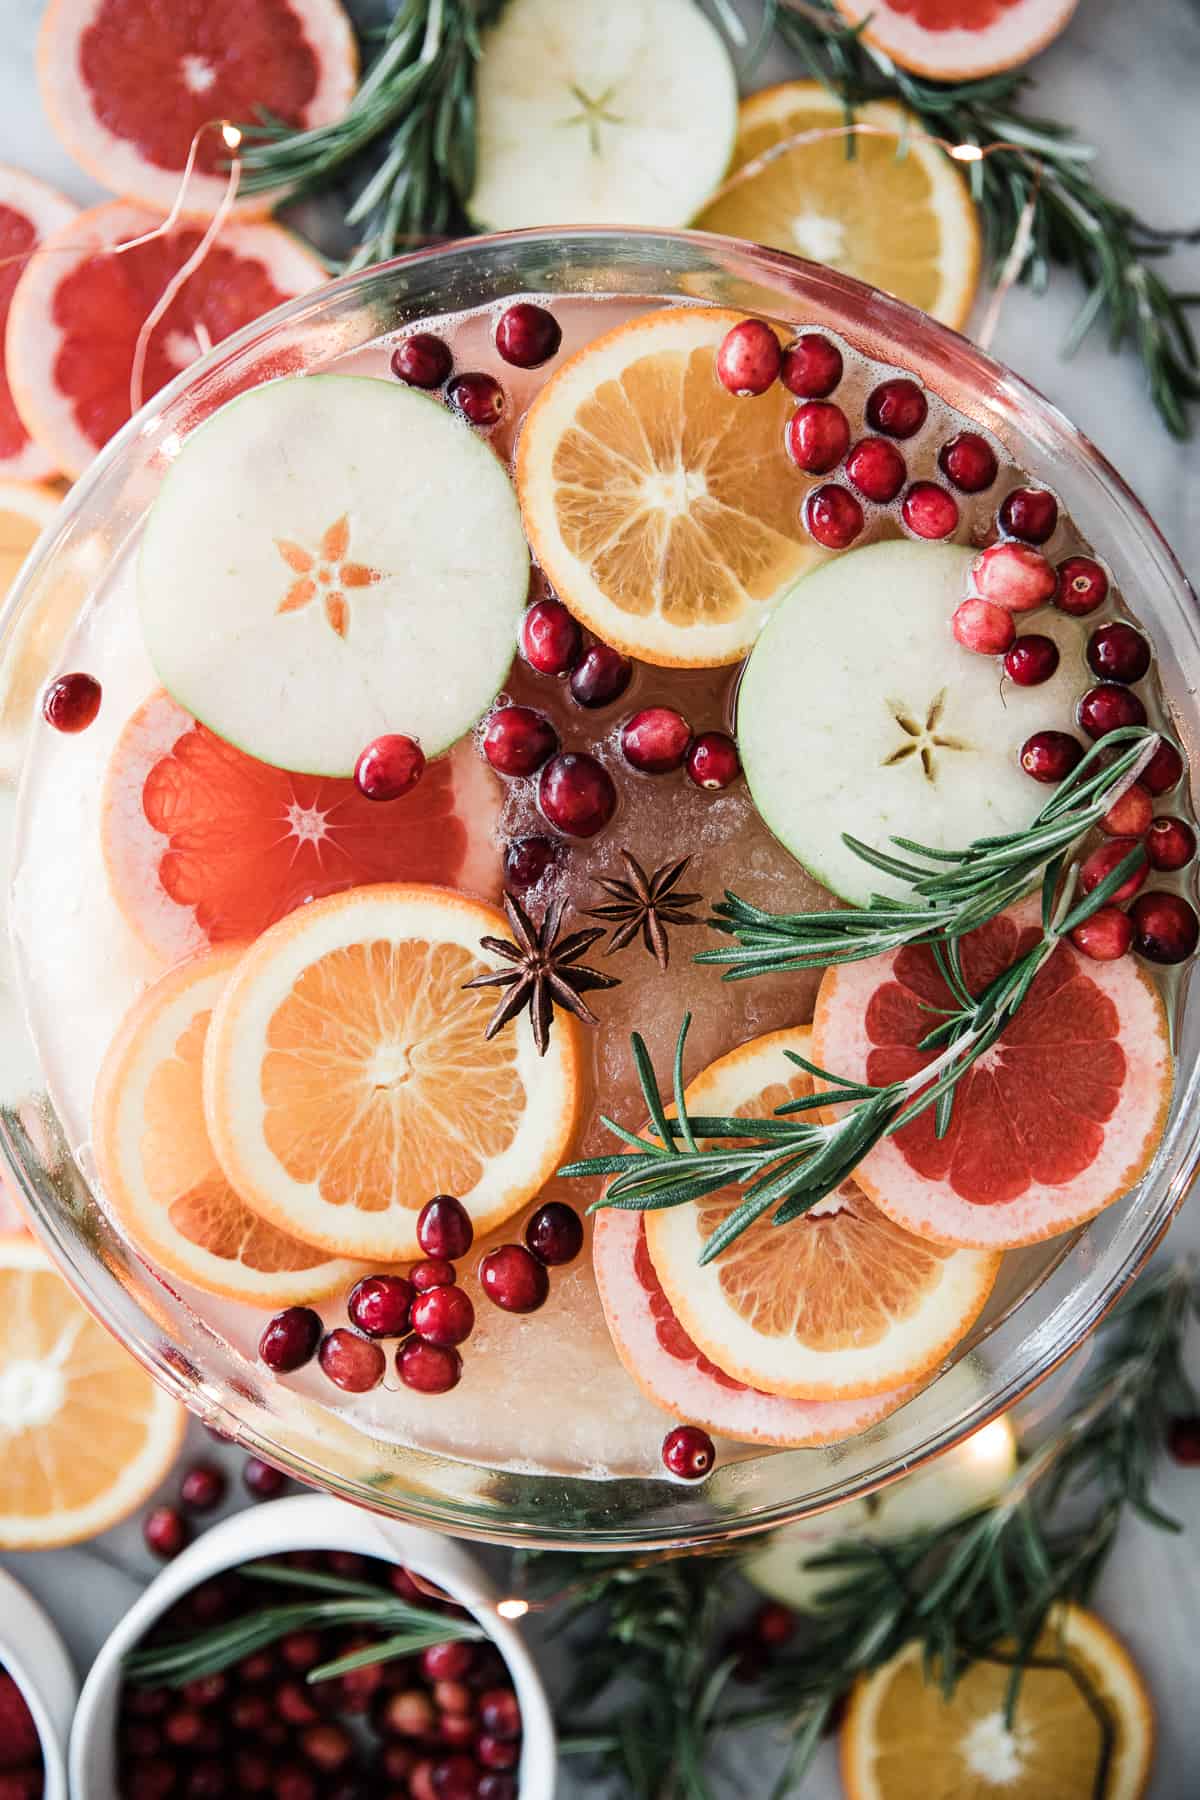 Large glass bowl of slushy bubbly drink with cranberries, sliced oranges and apples as garnishes. 